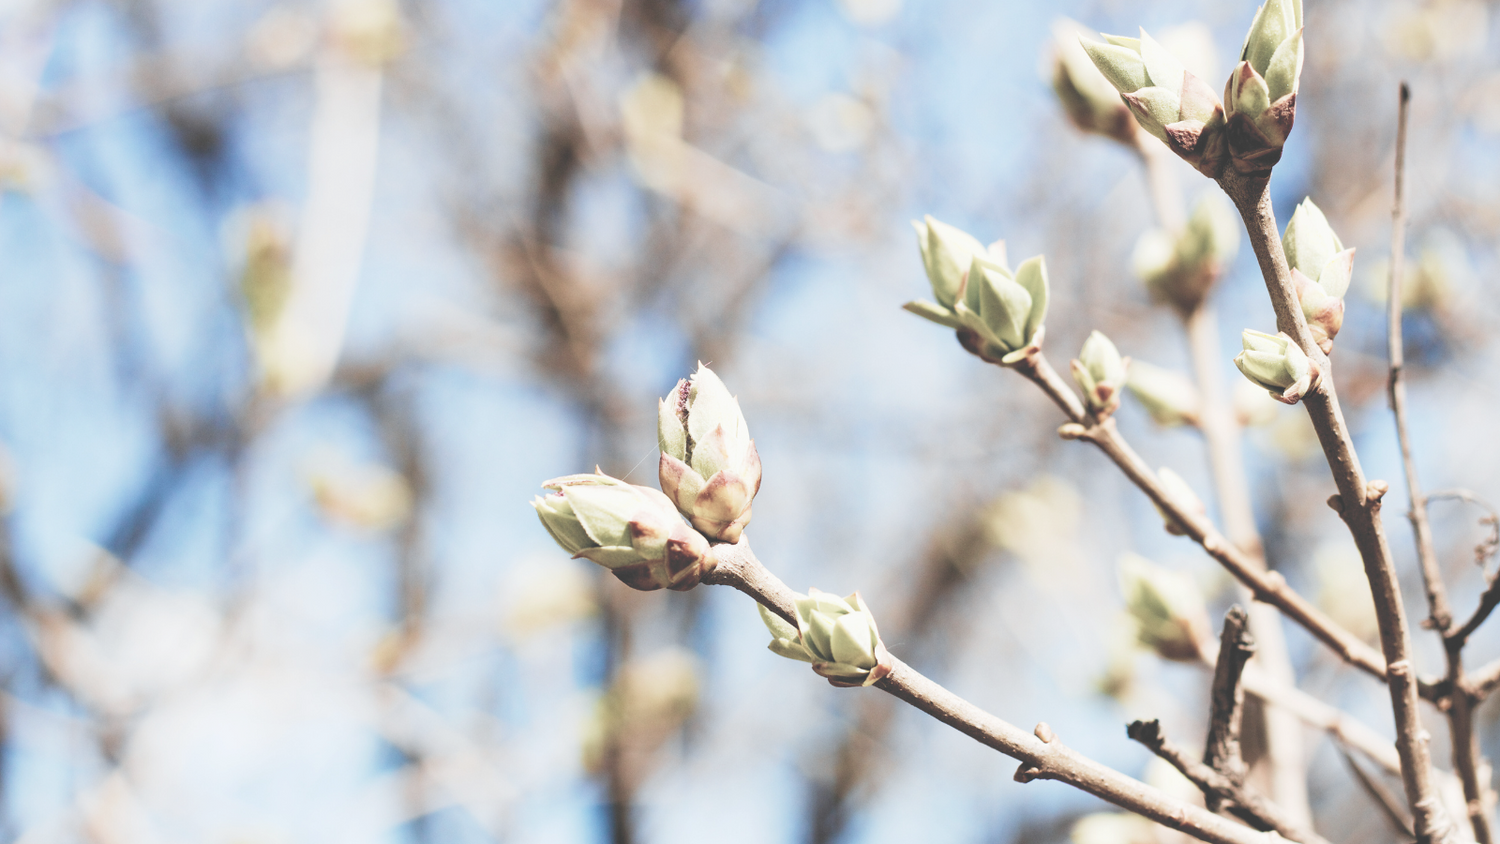 Springtime buds on tree branches